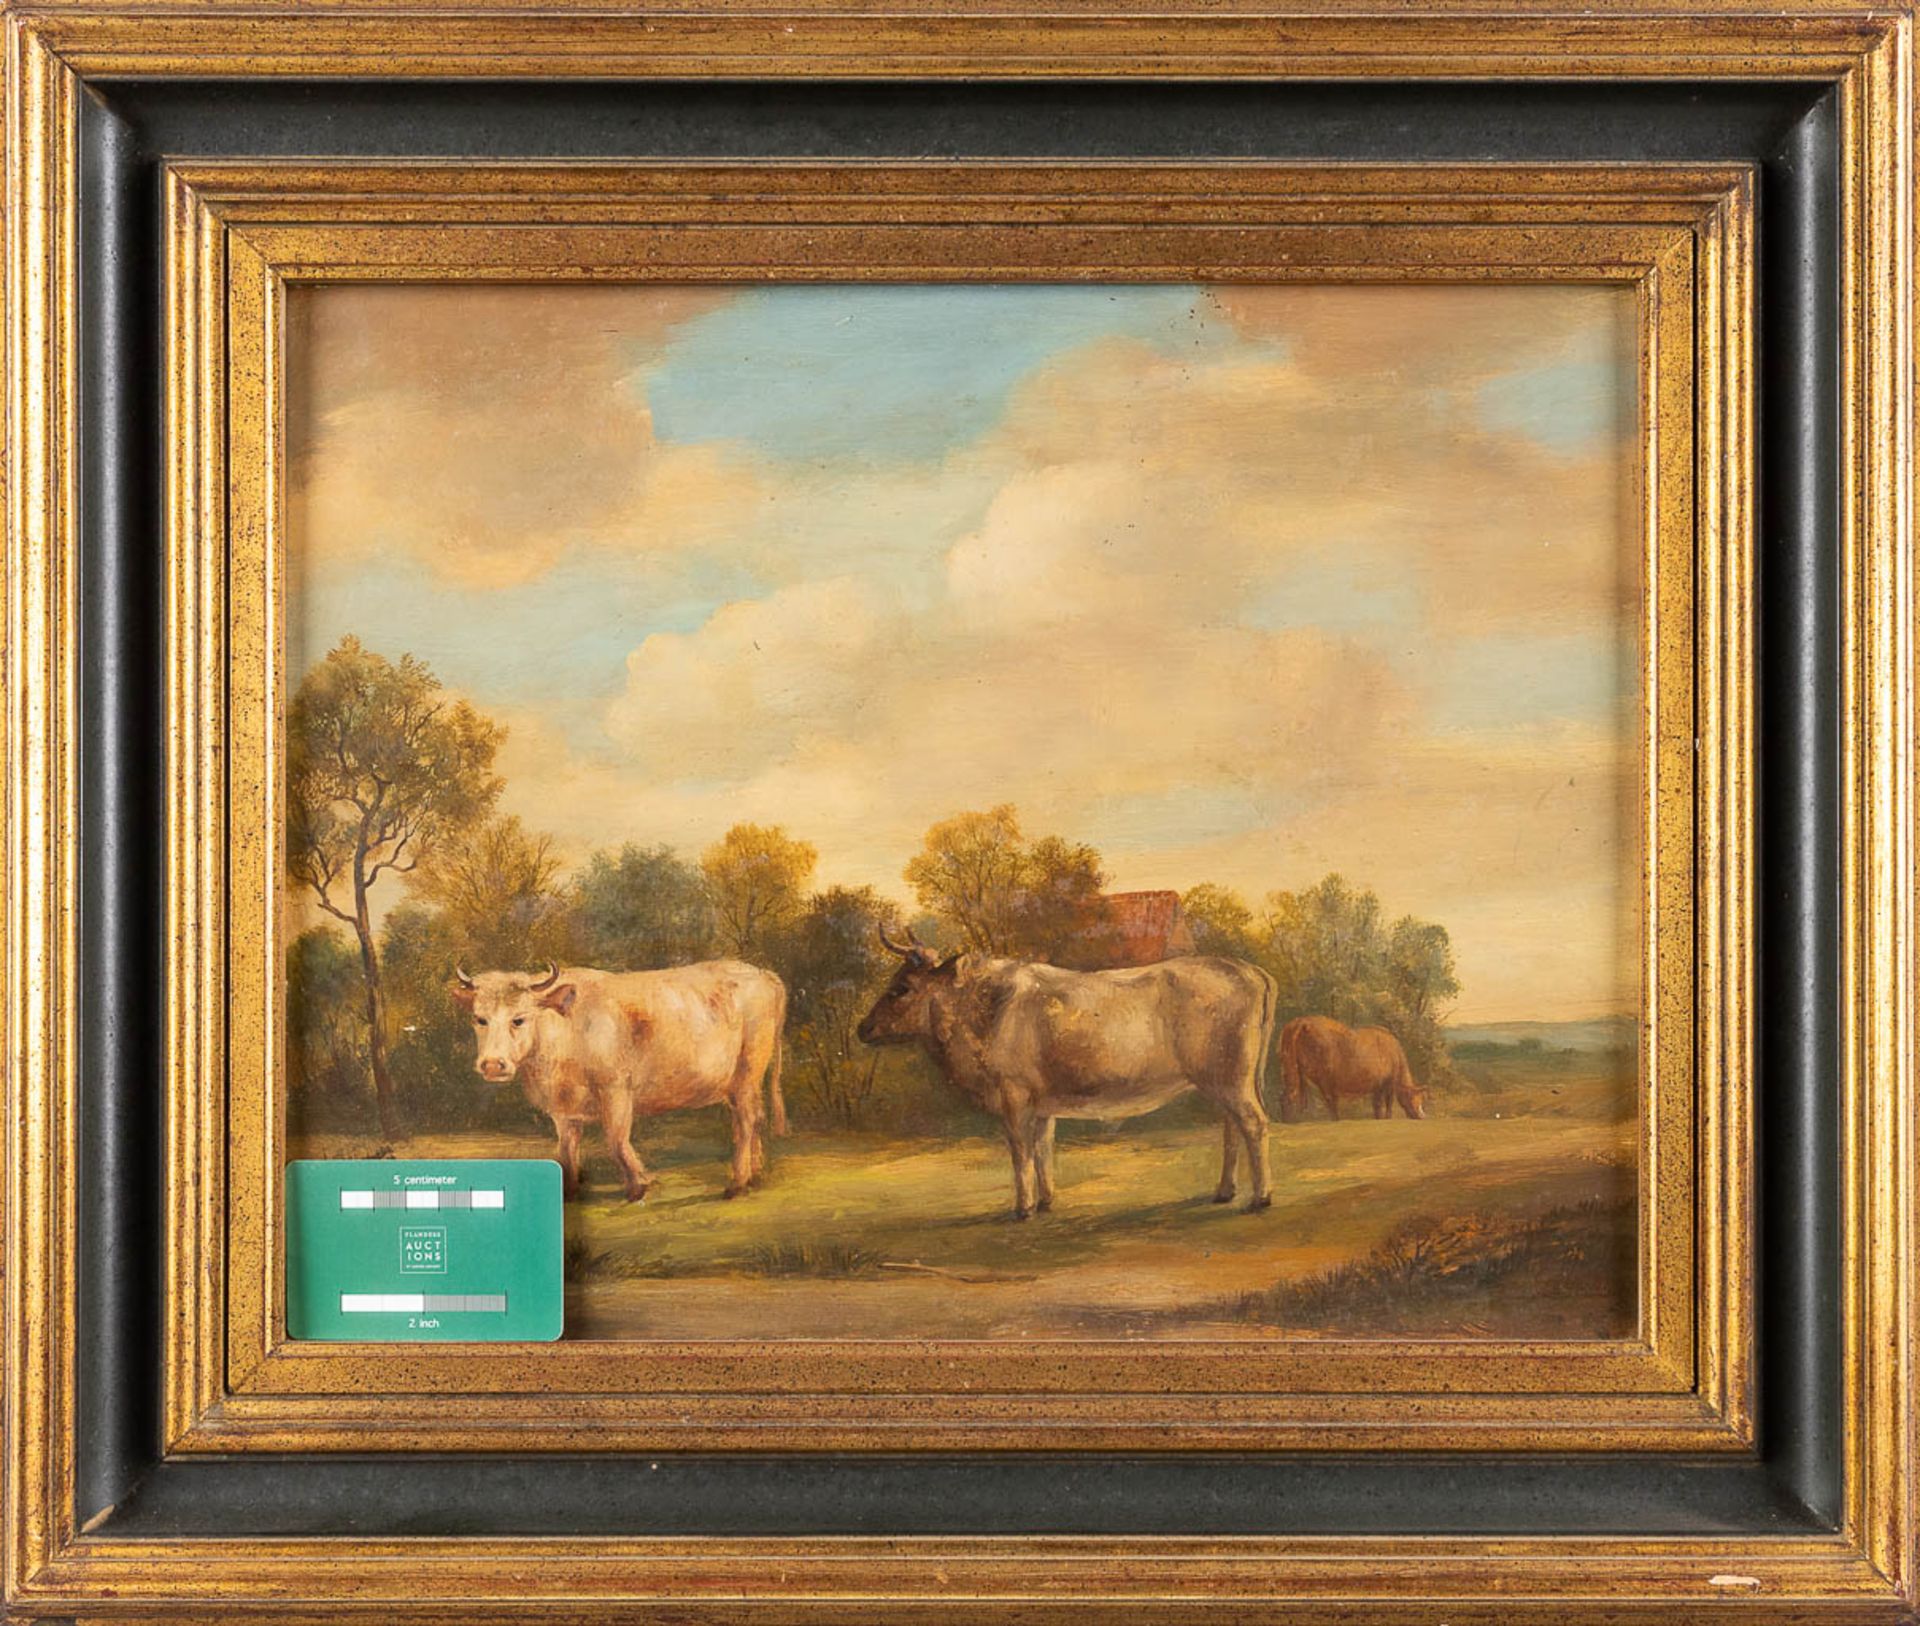 Cows in a field, a painting, oil on a panel. Circa 1900. (W: 43 x H: 34 cm) - Image 2 of 7